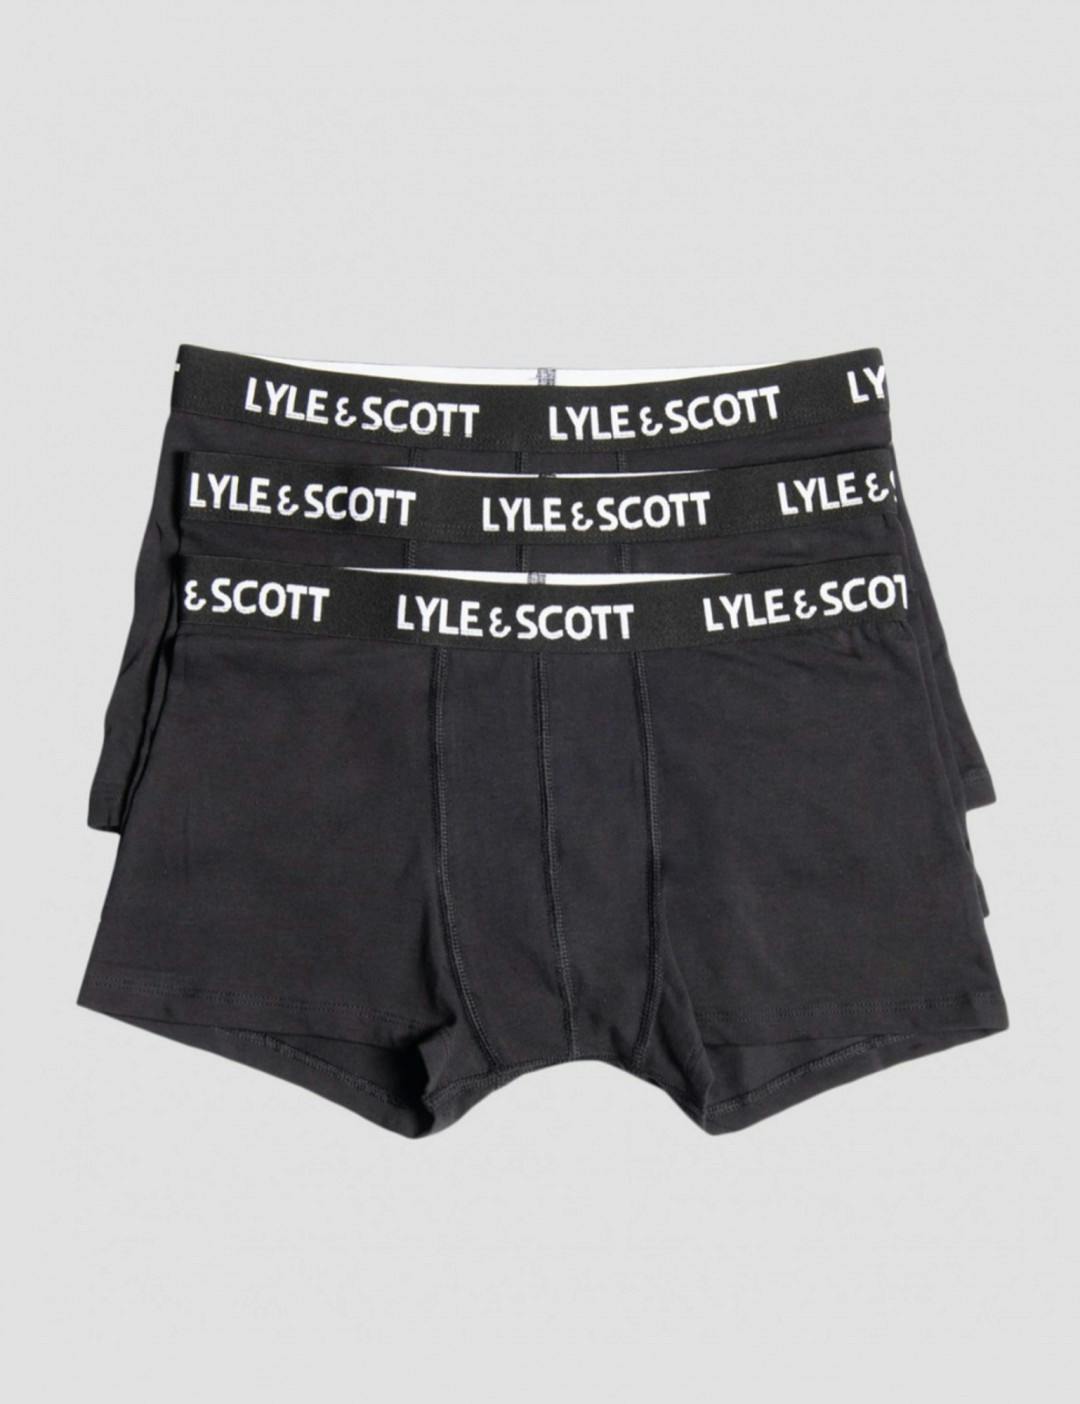 Boxed Solid 3 Pair Boxers